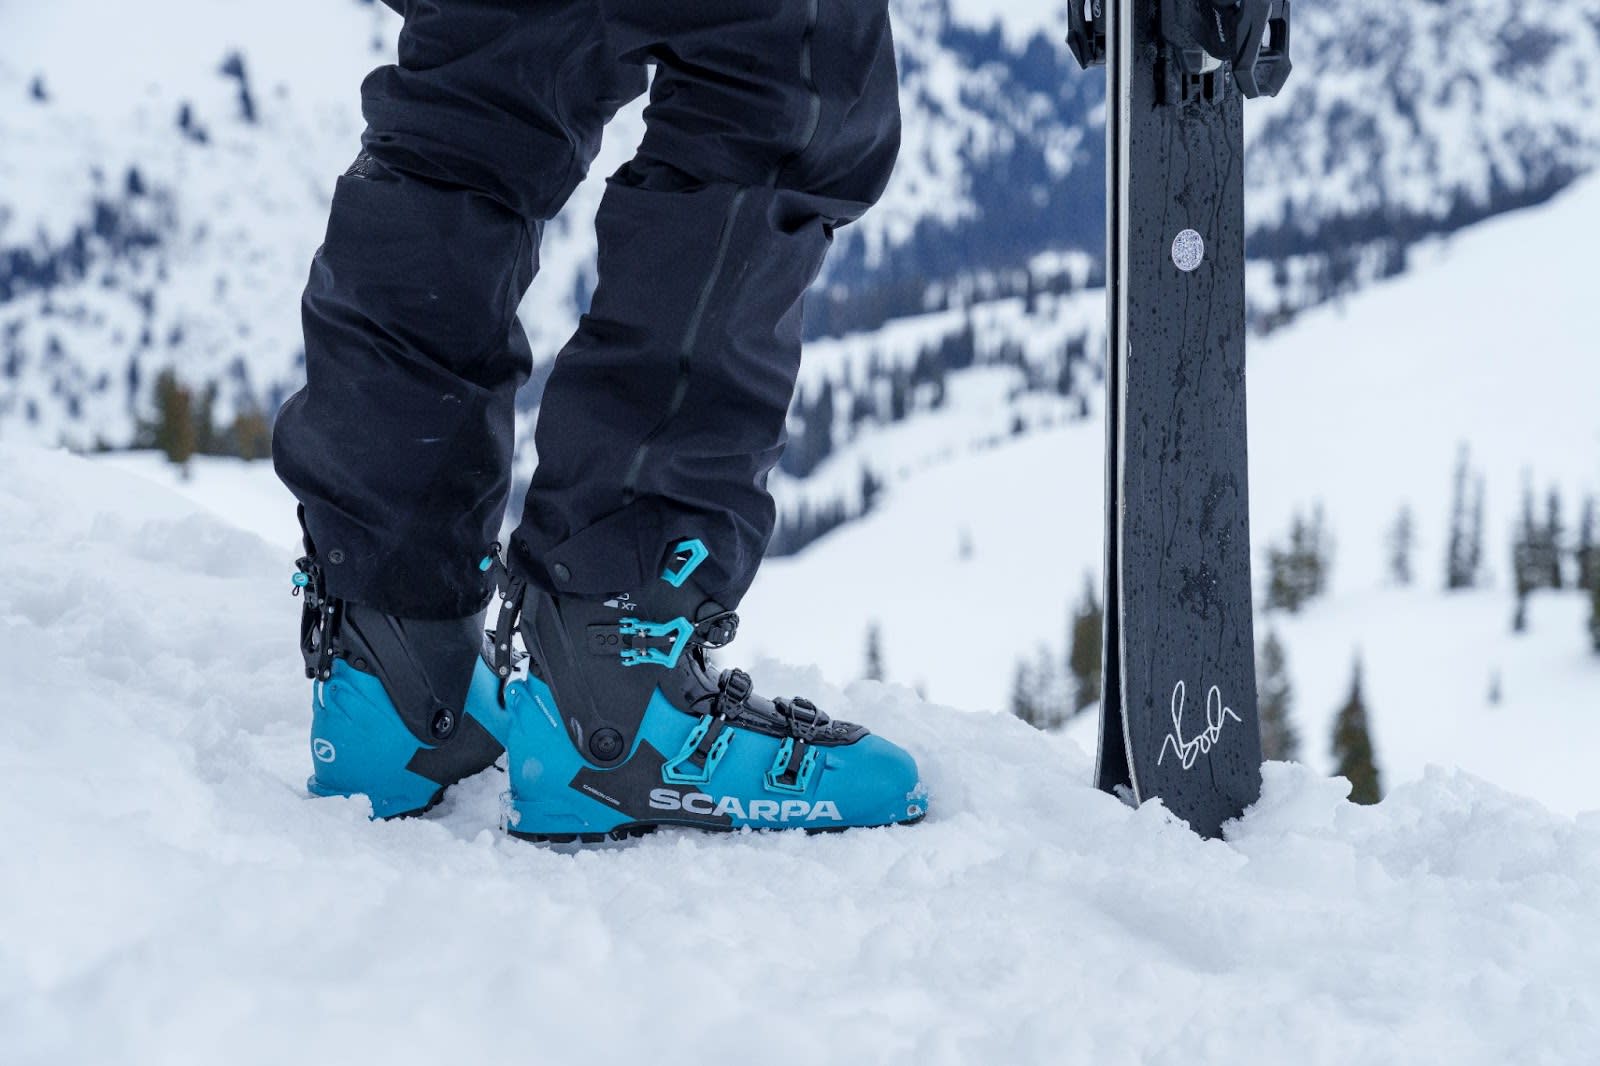 Close up of a person wearing the SCARPA 4-Quattro XT ski boot in the snow